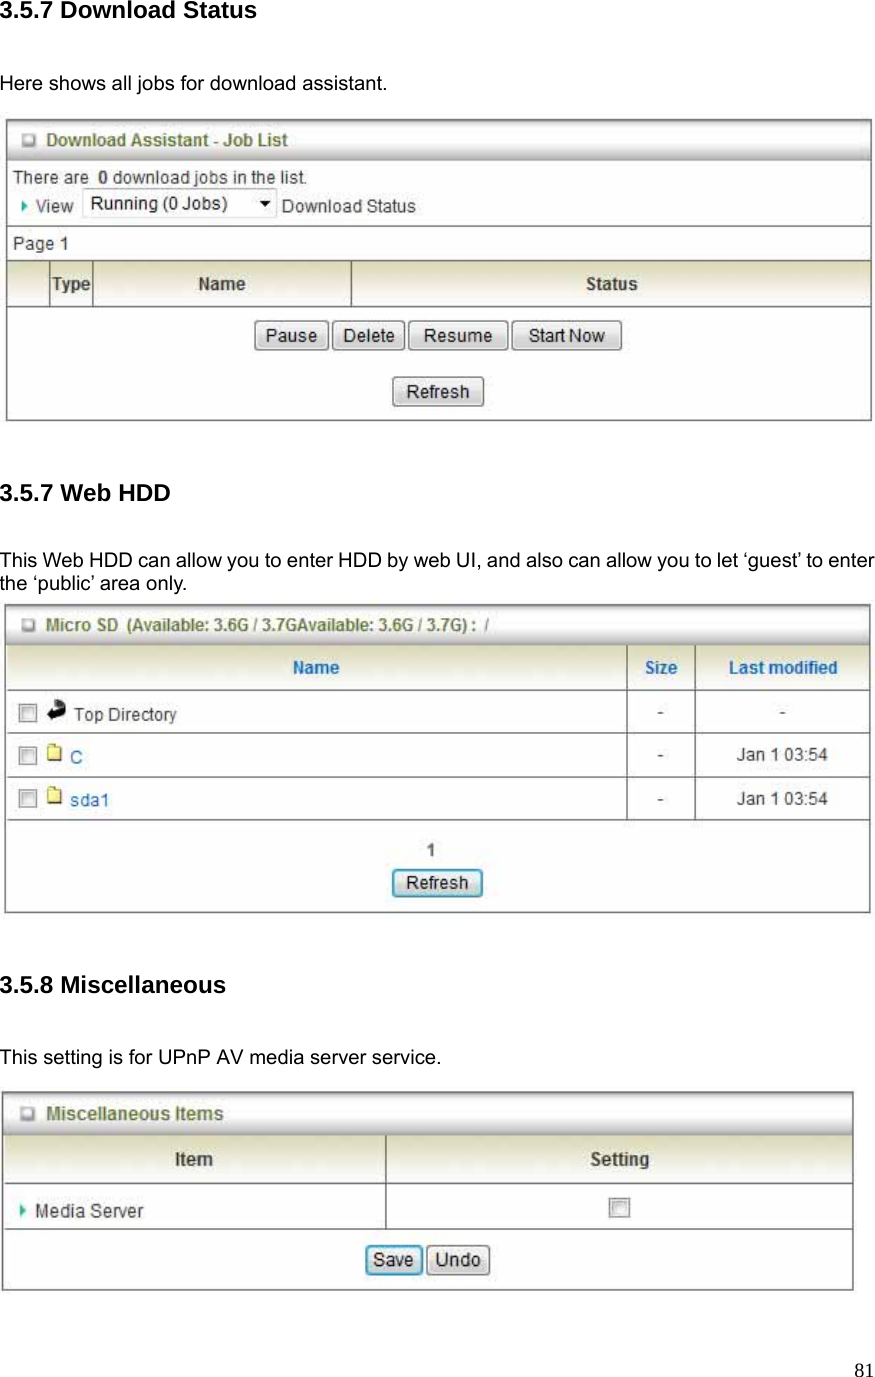  813.5.7 Download Status  Here shows all jobs for download assistant.   3.5.7 Web HDD  This Web HDD can allow you to enter HDD by web UI, and also can allow you to let ‘guest’ to enter the ‘public’ area only.   3.5.8 Miscellaneous  This setting is for UPnP AV media server service.  